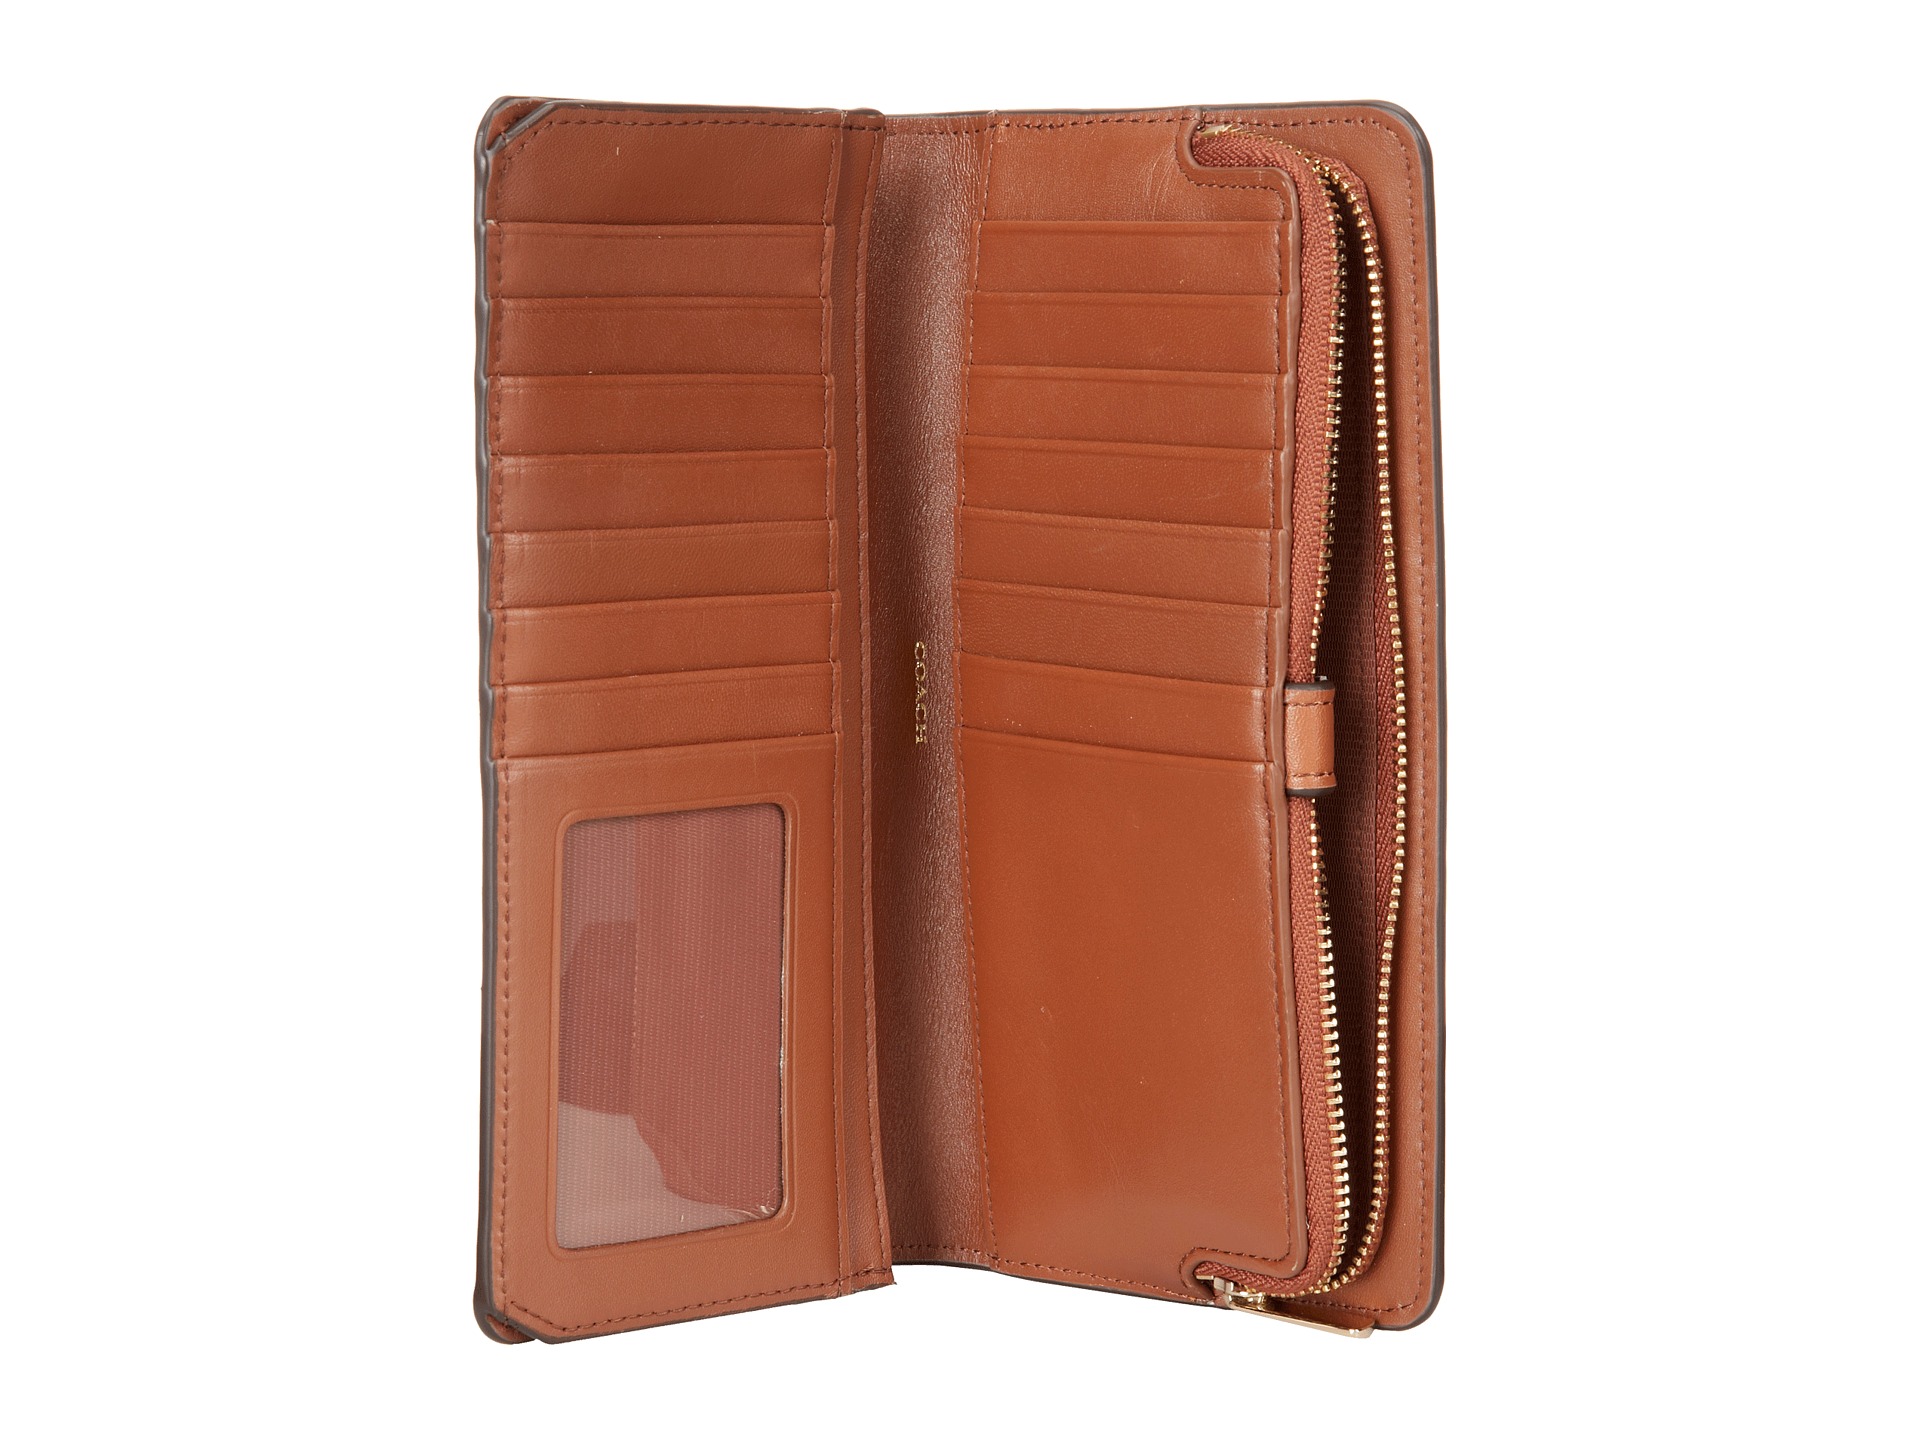 COACH Madison Leather Skinny Wallet - www.bagssaleusa.com Free Shipping BOTH Ways